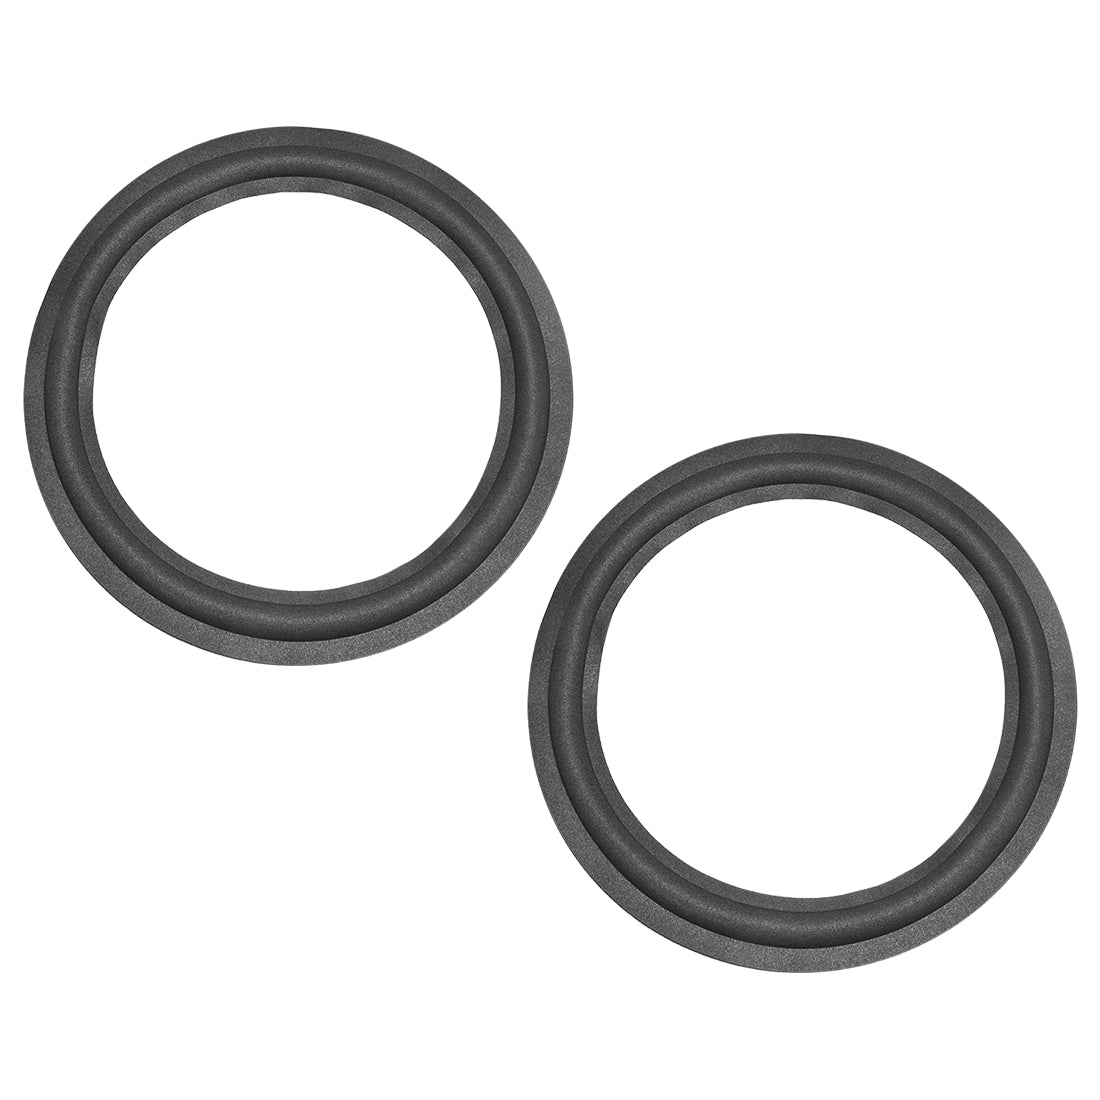 uxcell Uxcell 11.6 Inch Foam Speaker Edge Surround Ring Replacement Parts for Speaker Repair or DIY 2pcs